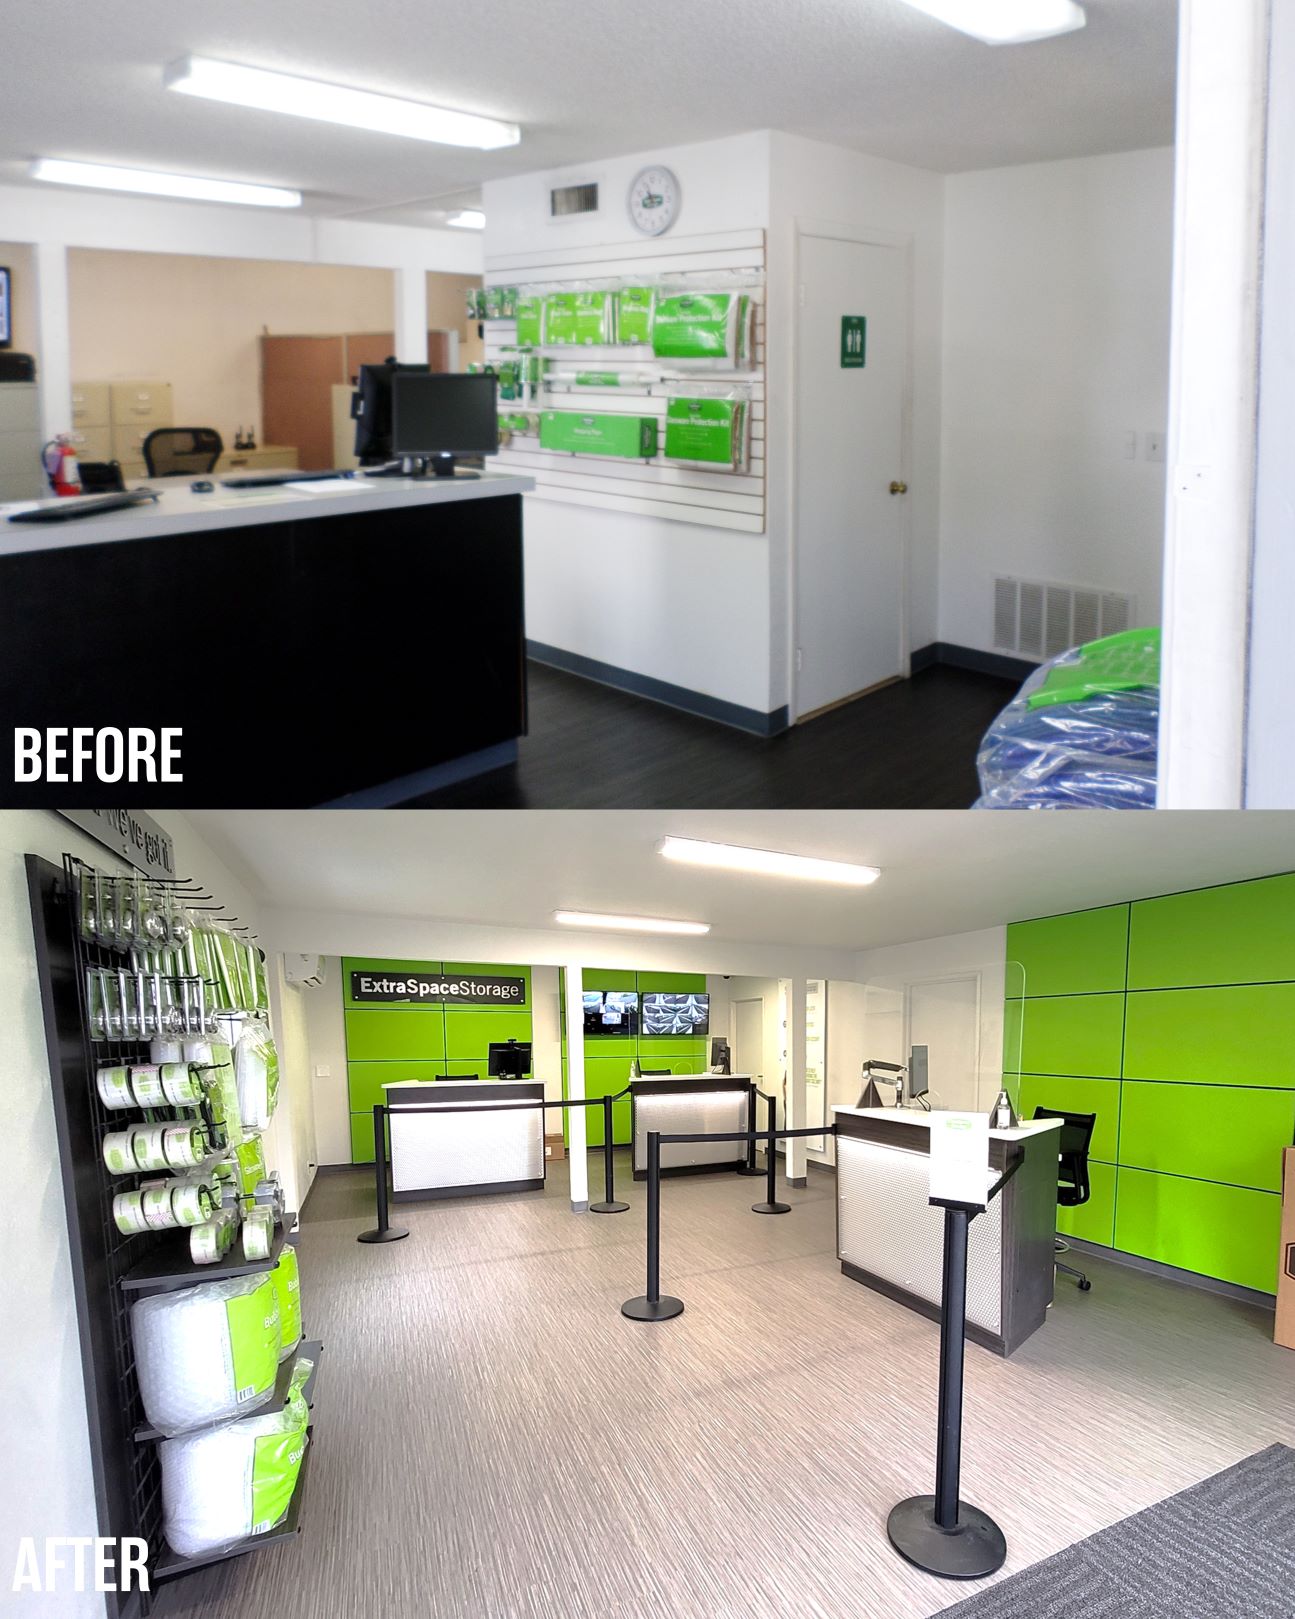 Before & After Photos of Interior of Expanded Extra Space Storage Facility in San Diego